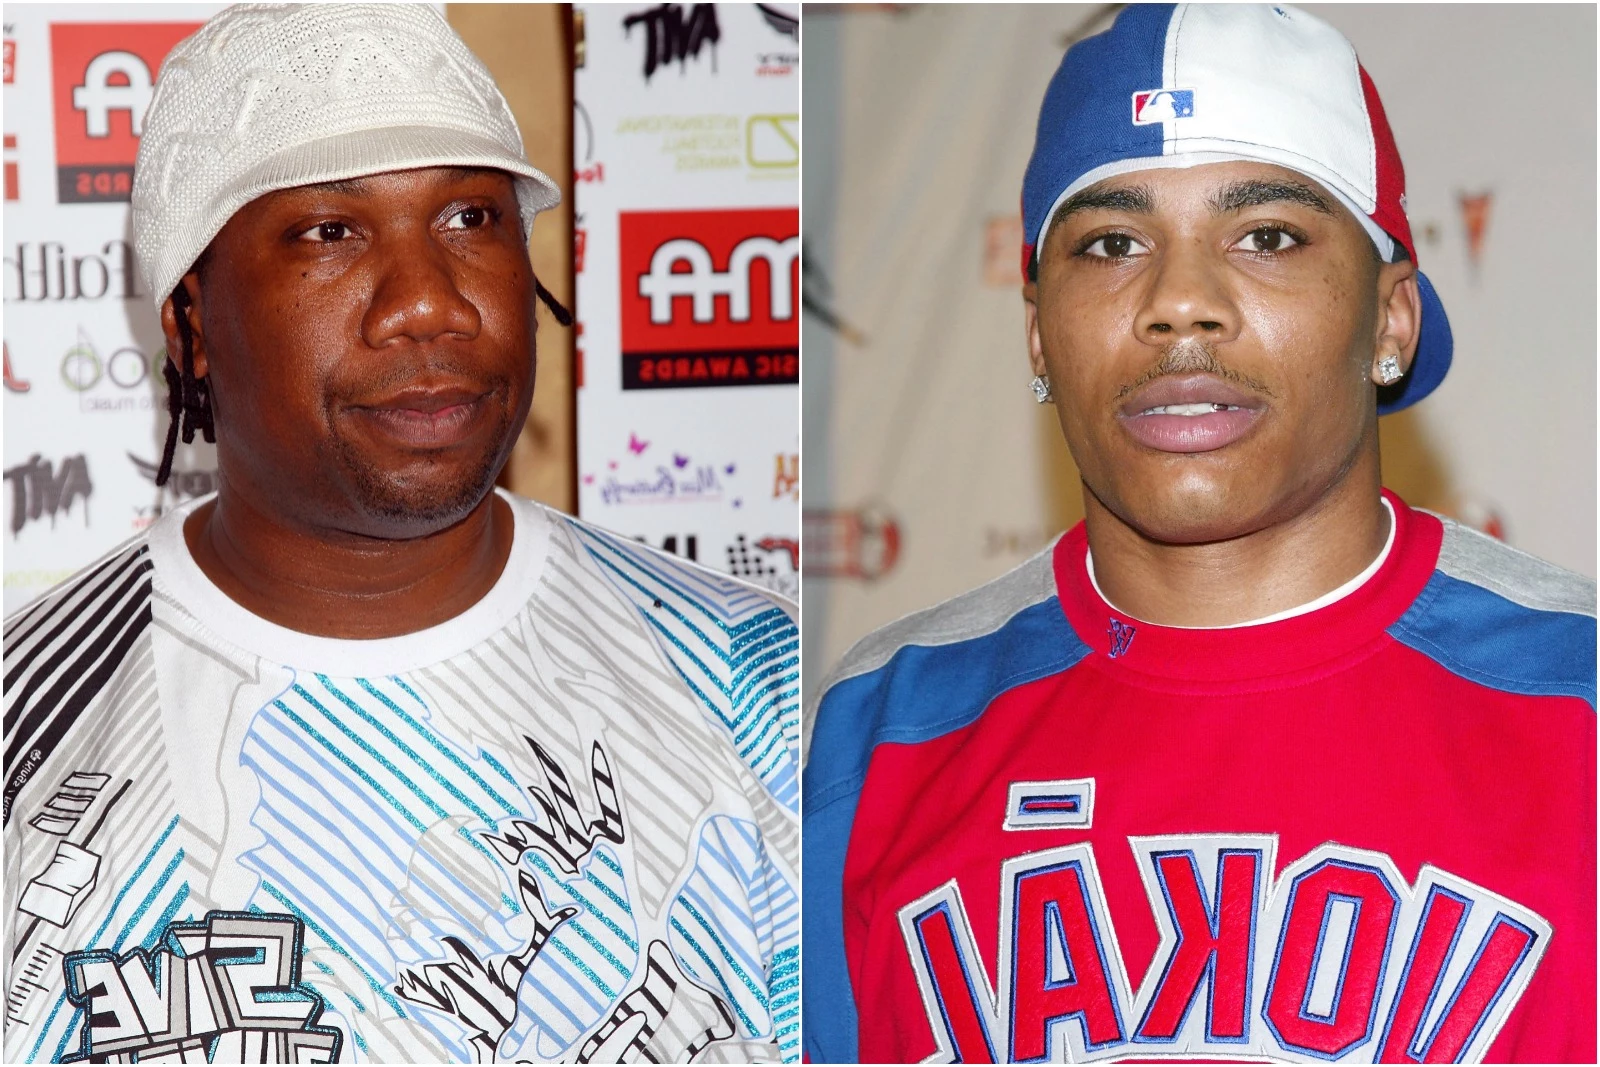 KRS-One vs. Nelly: The Origins of One of Hip-Hop's Lamest Beefs